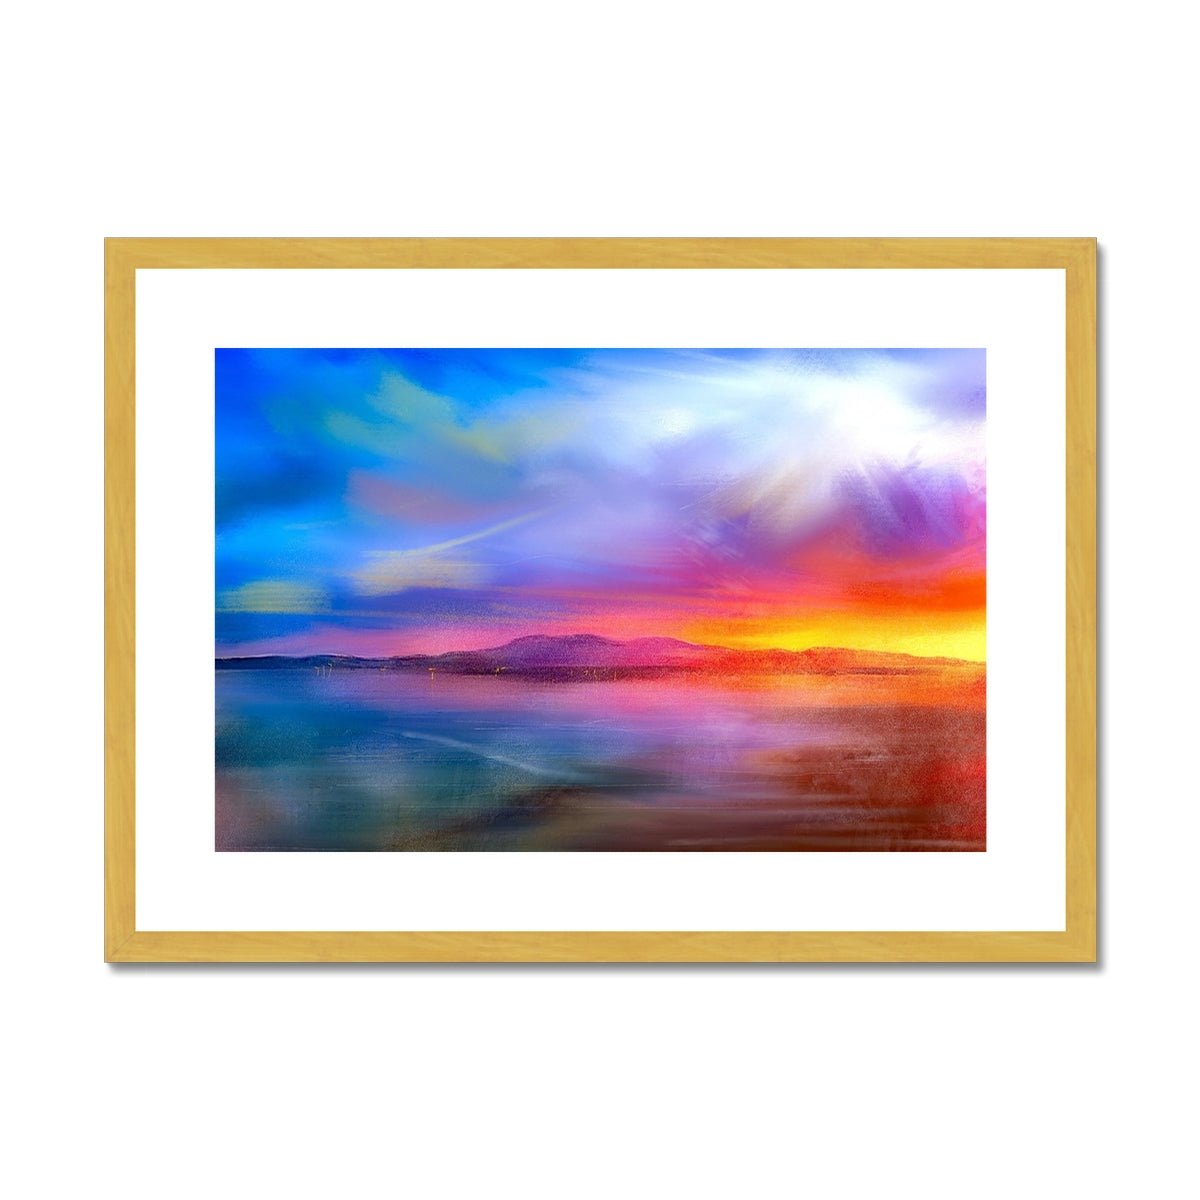 Arran Sunset Painting | Antique Framed & Mounted Prints From Scotland-Antique Framed & Mounted Prints-Arran Art Gallery-A2 Landscape-Gold Frame-Paintings, Prints, Homeware, Art Gifts From Scotland By Scottish Artist Kevin Hunter